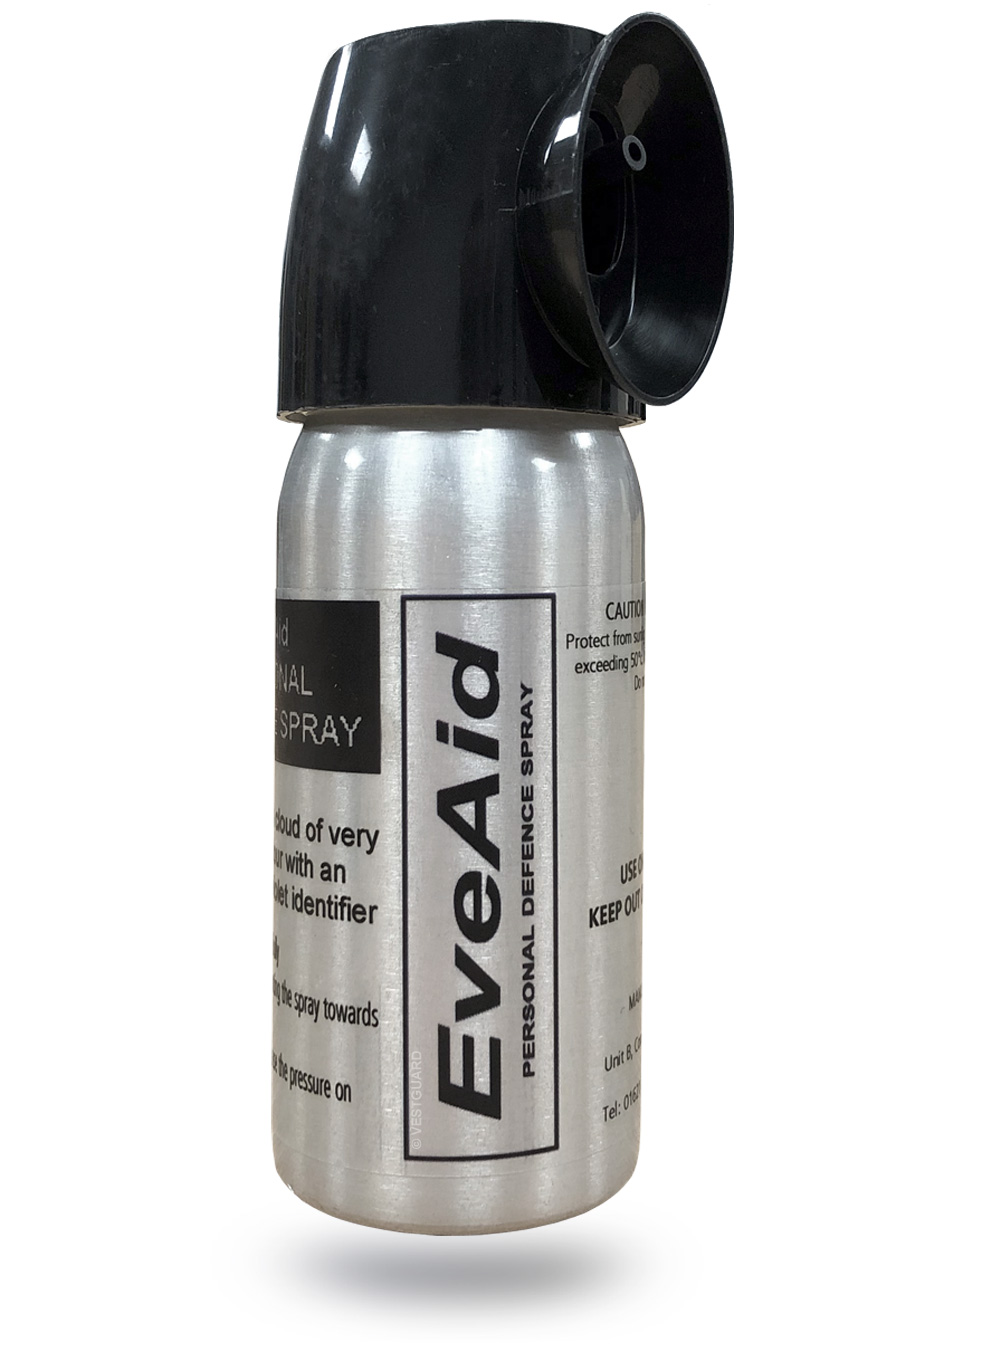 VestGuard EveAid Personal Defence Spray for Protection from attacks and  rape deterrent Triple Action